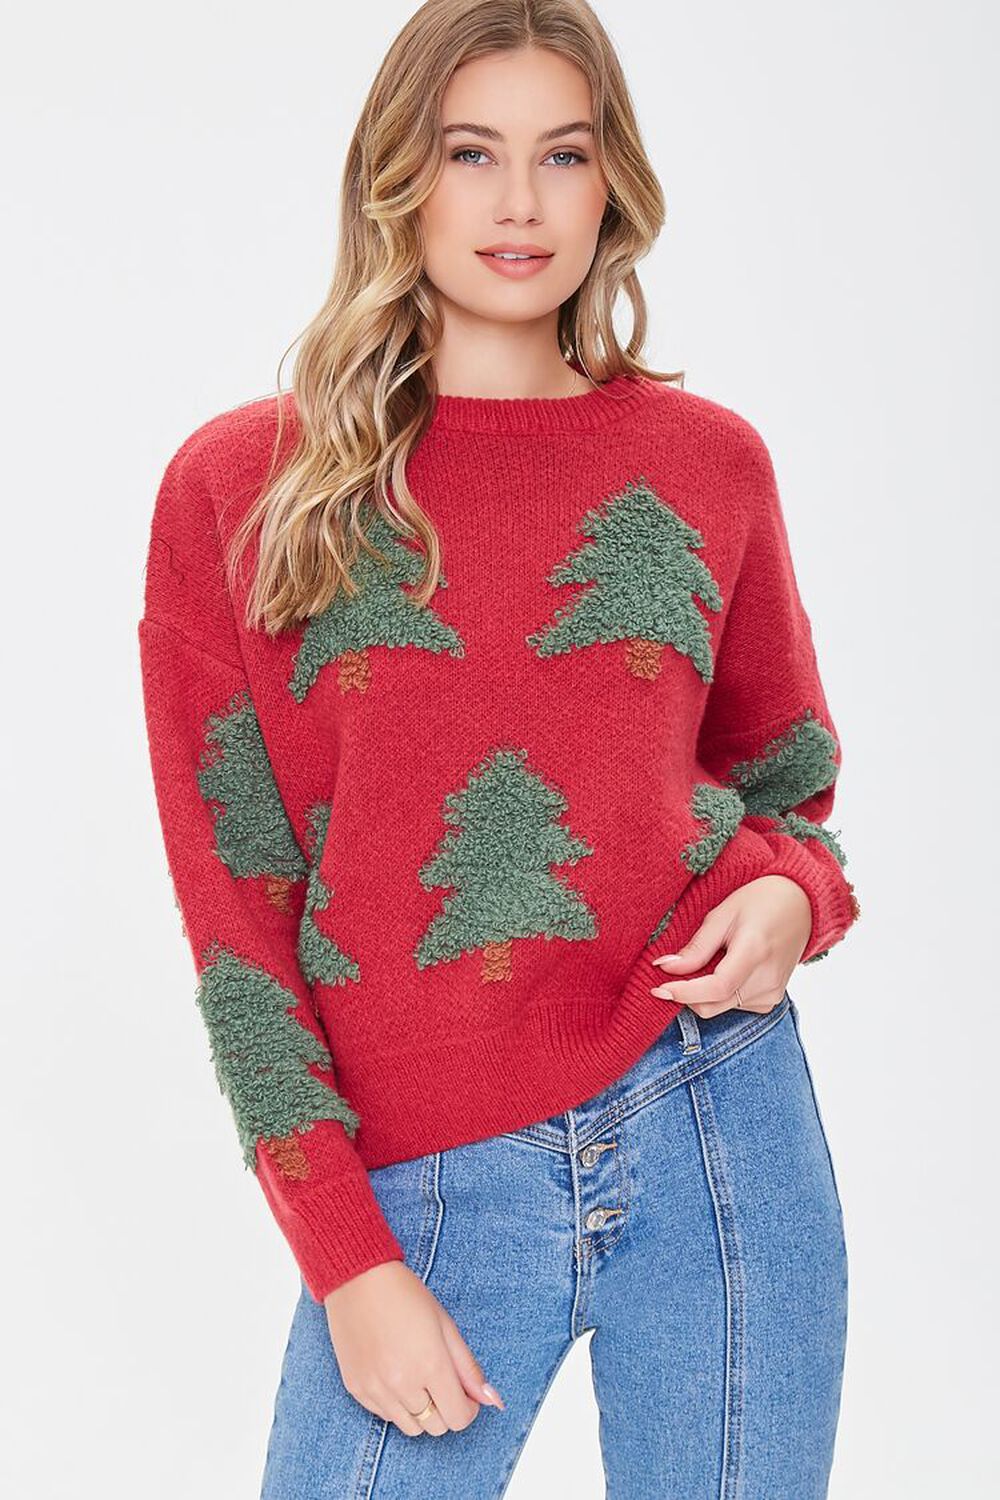 RED/GREEN Textured Tree Pattern Sweater, image 1